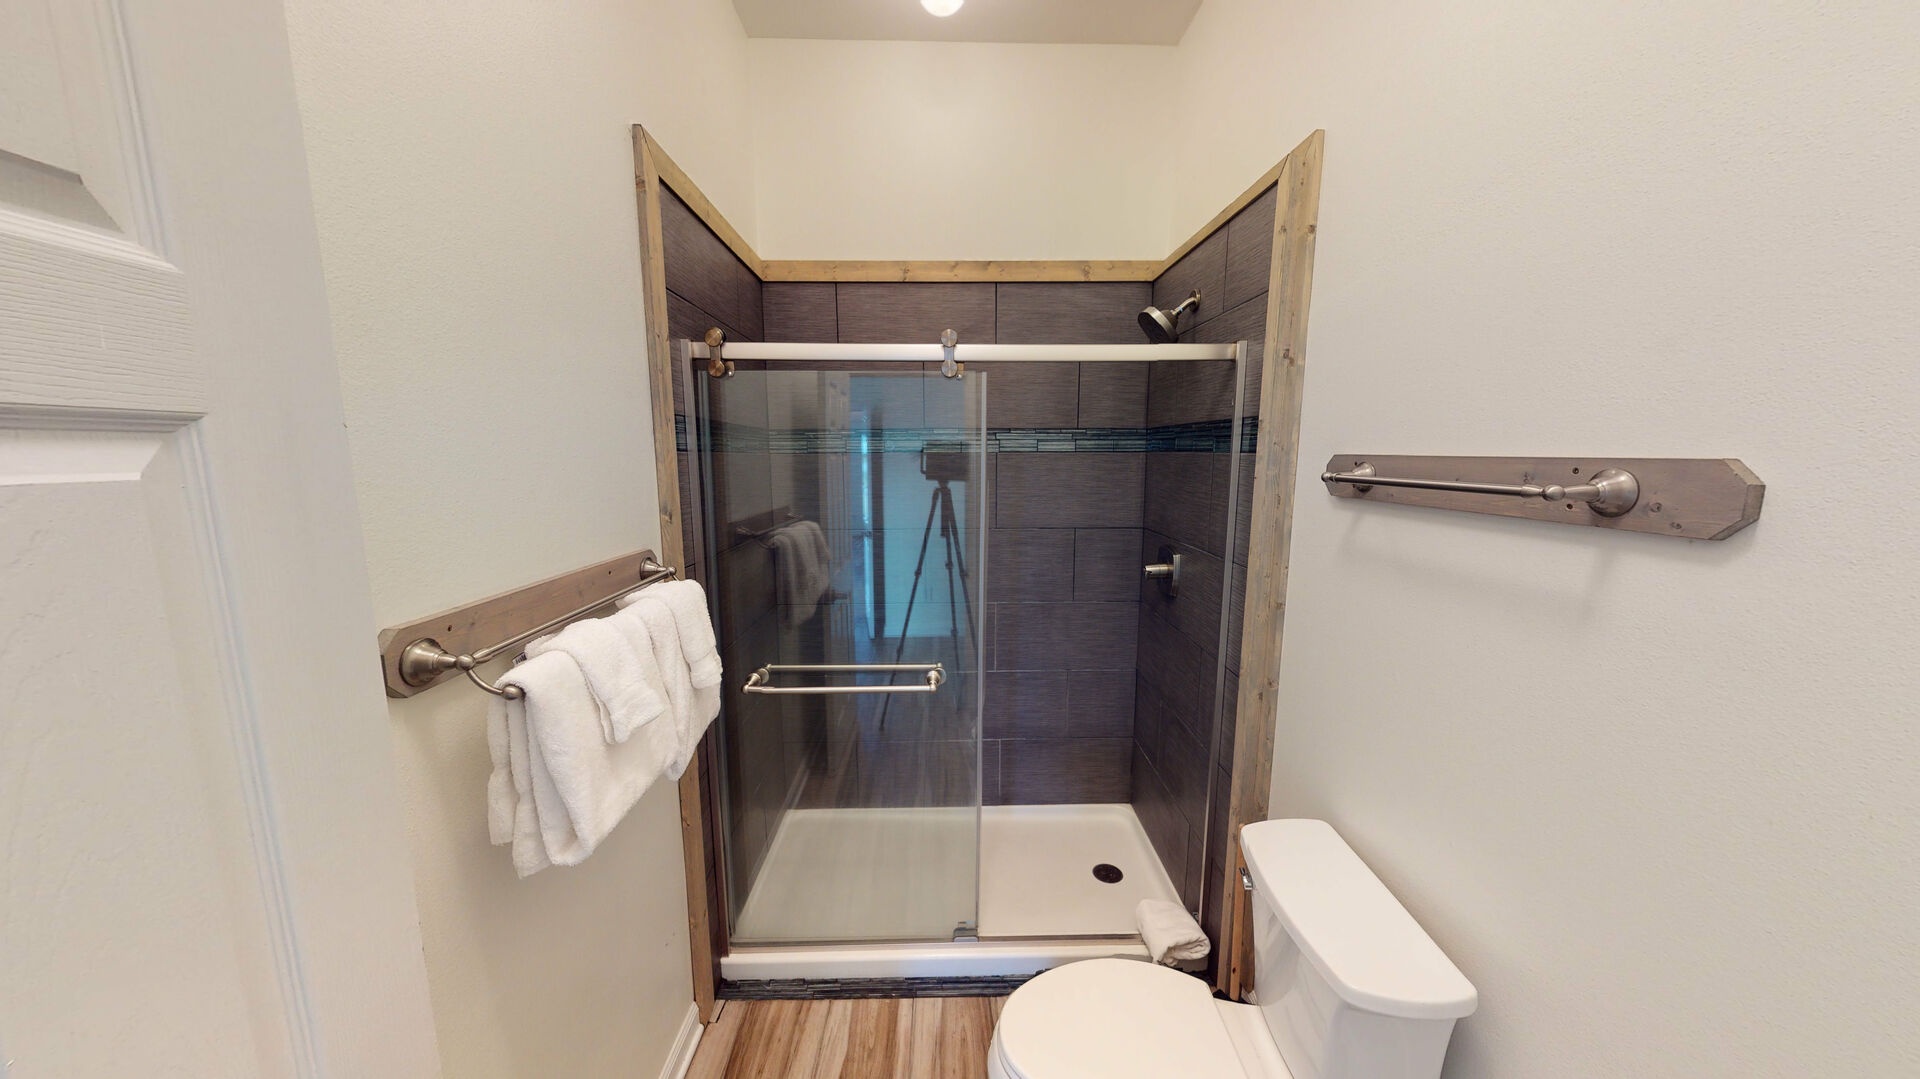 The master bathroom has a walk-in shower